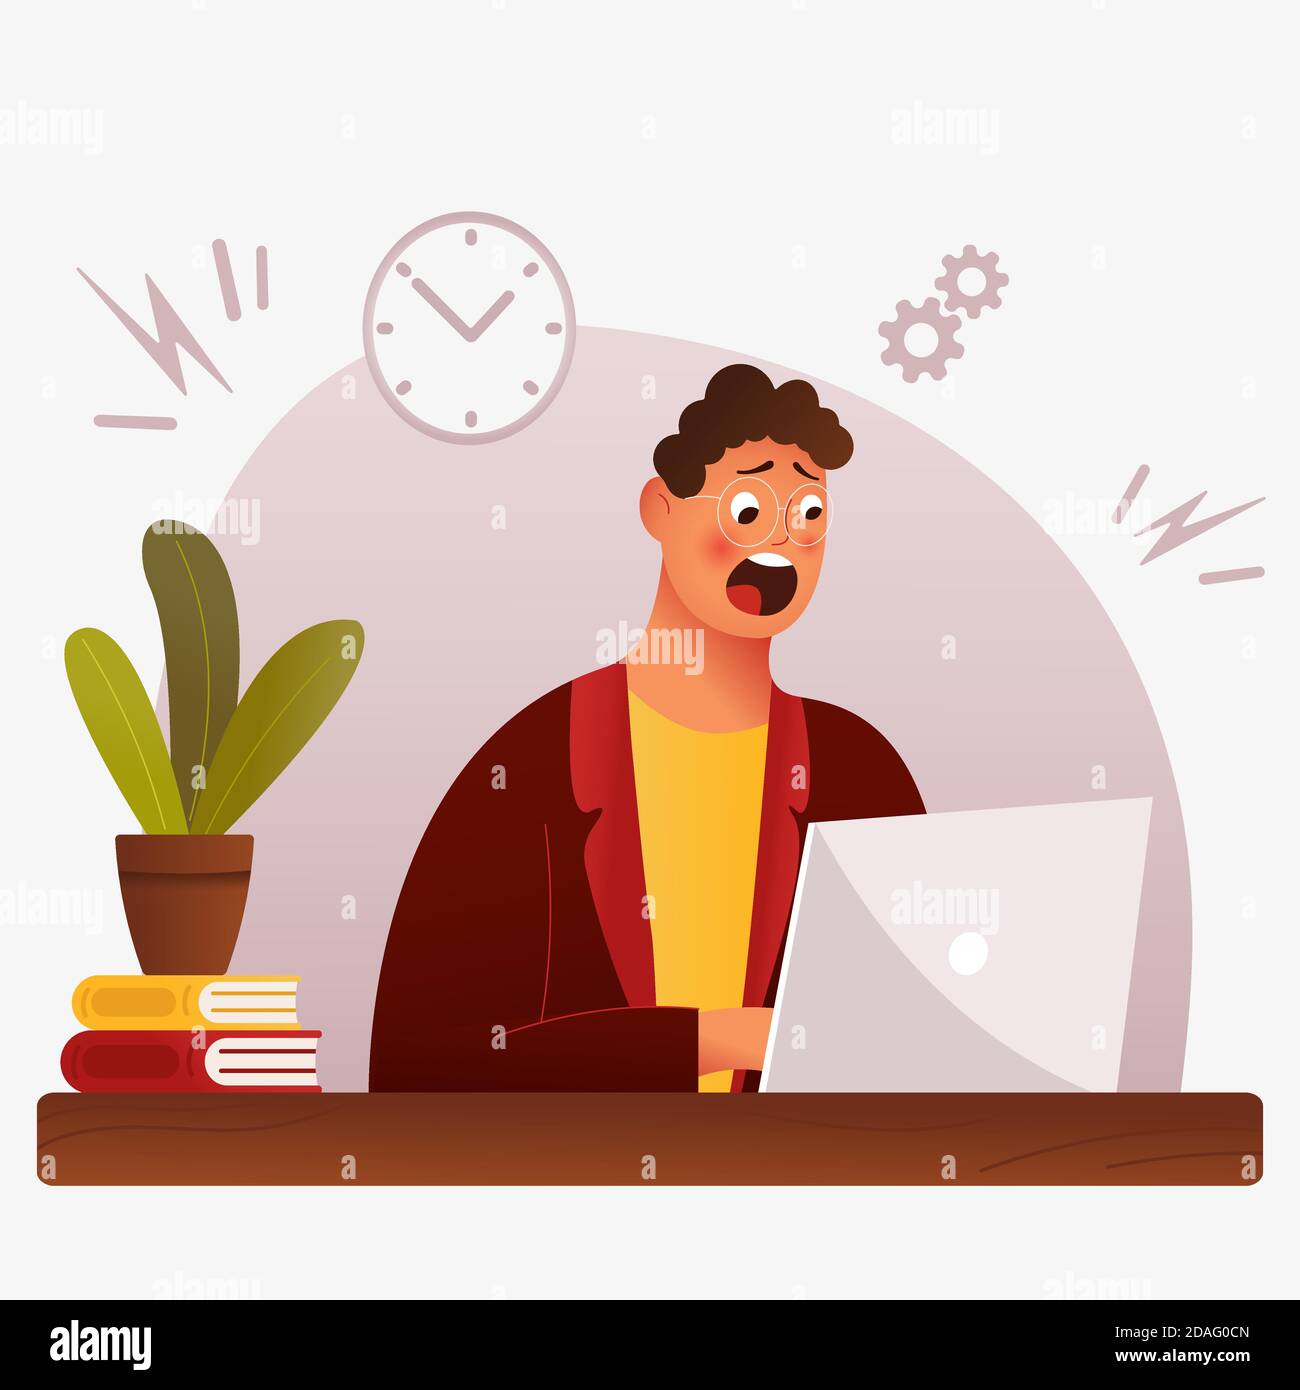 Flat stressful busy young man workload at work. Concept blockage tired employee, workplace with paper. Remote Freelance Work Concept. Man Freelancer Stock Vector